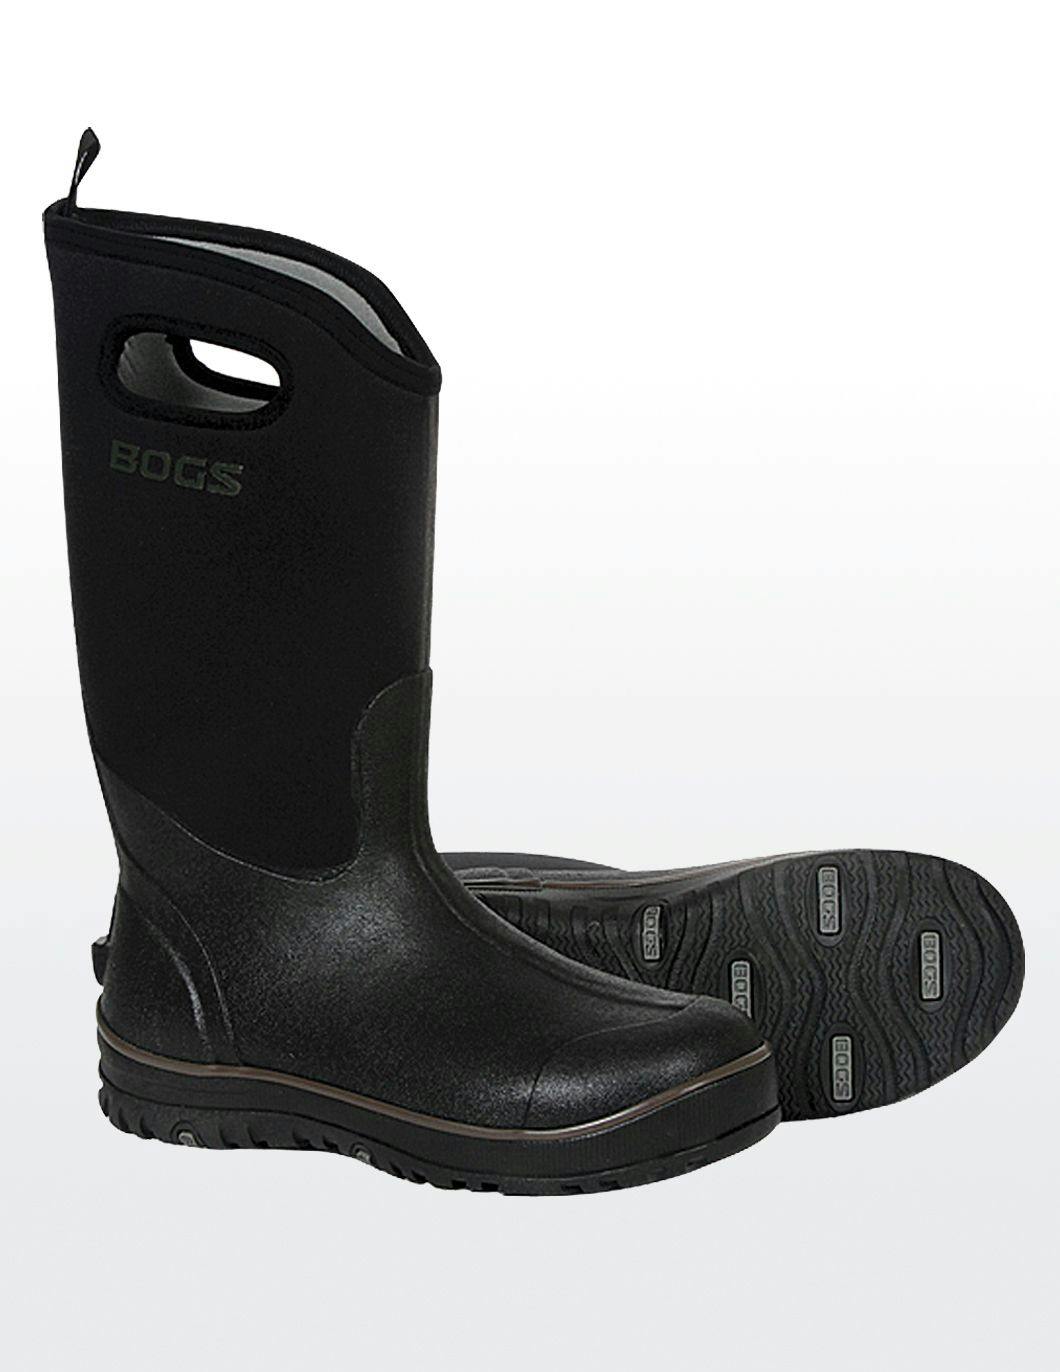 bogs-mens-ultra-high-with-handles-black